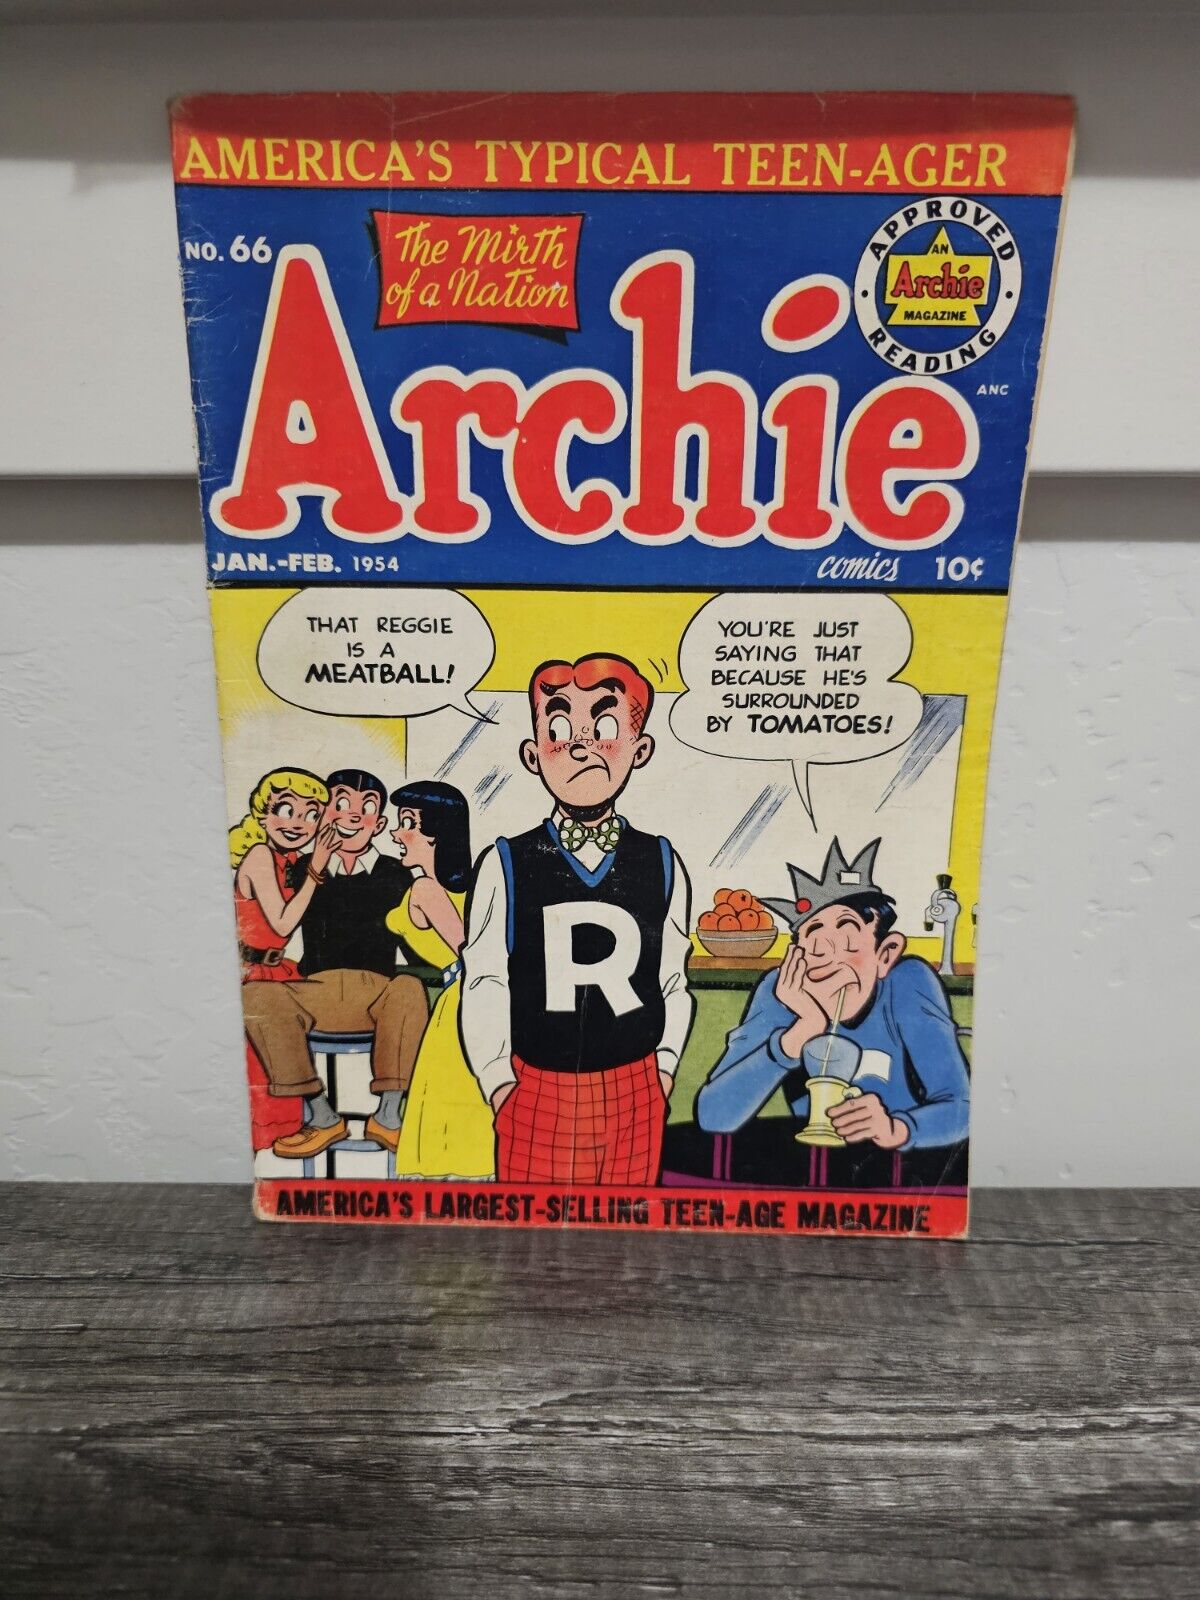 ARCHIE COMICS #66 GOLDEN AGE -JANUARY - FEBRUARY 1954 